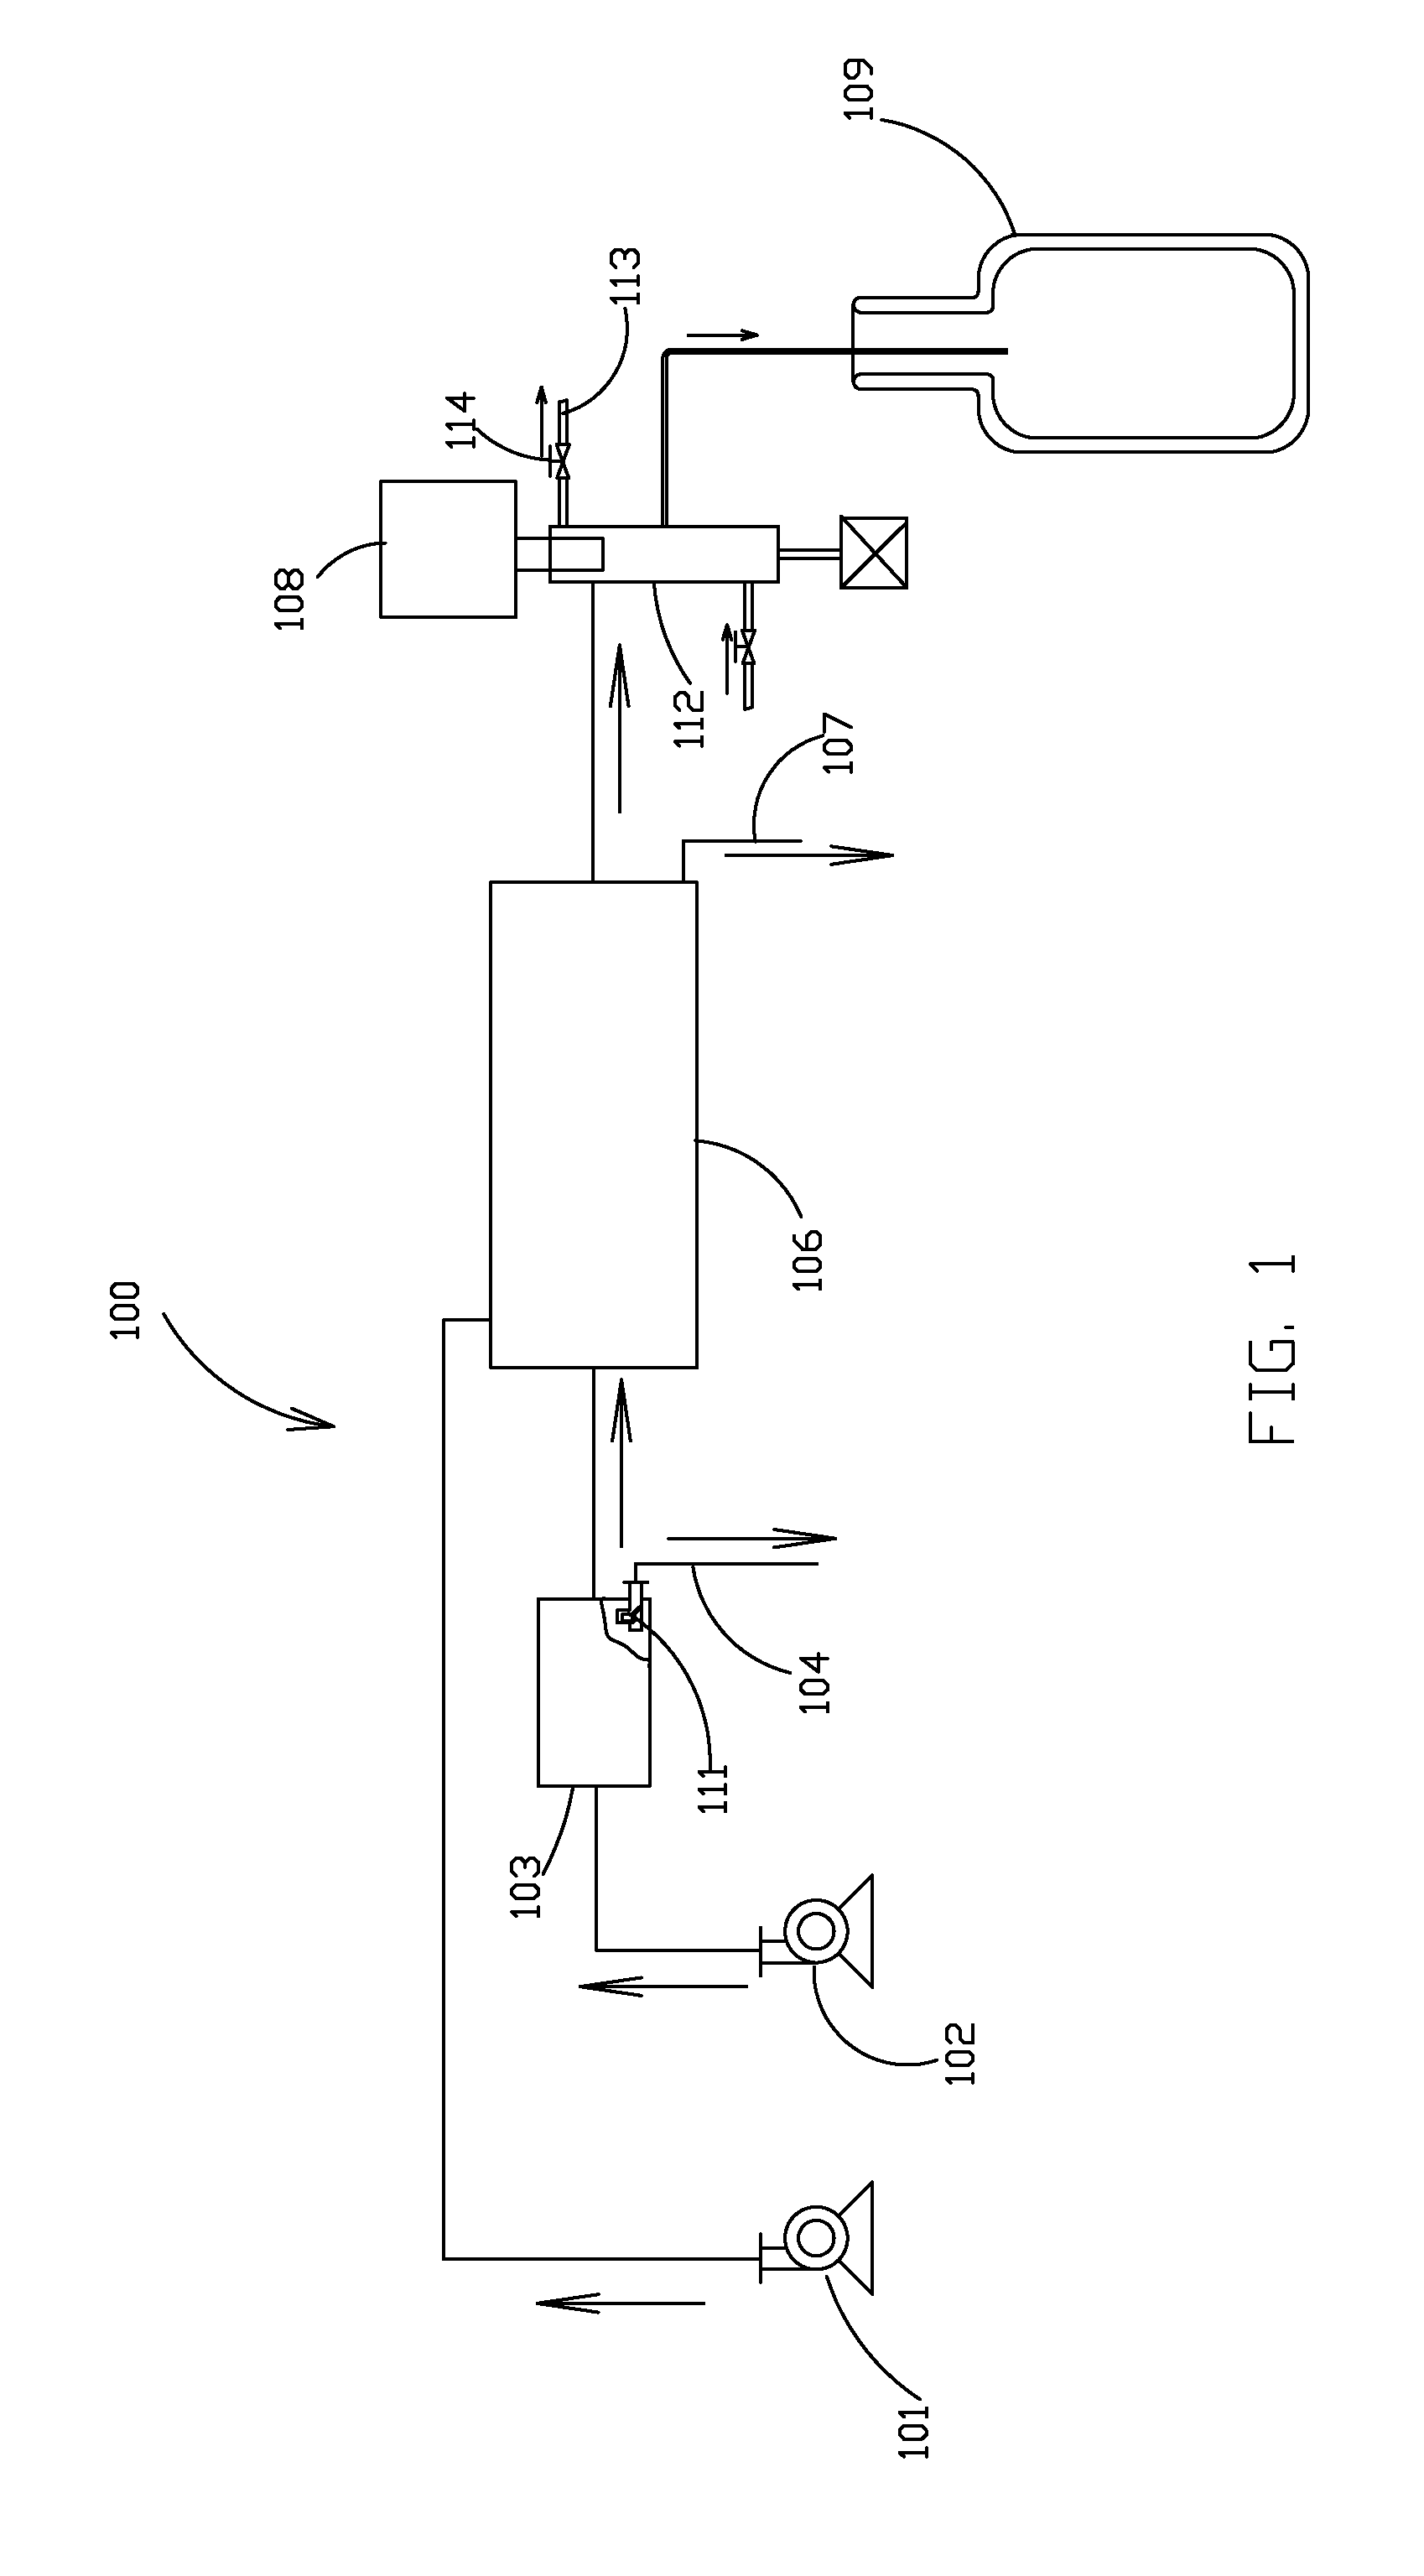 Apparatus and Method for Condensing Contaminants for a Cryogenic System